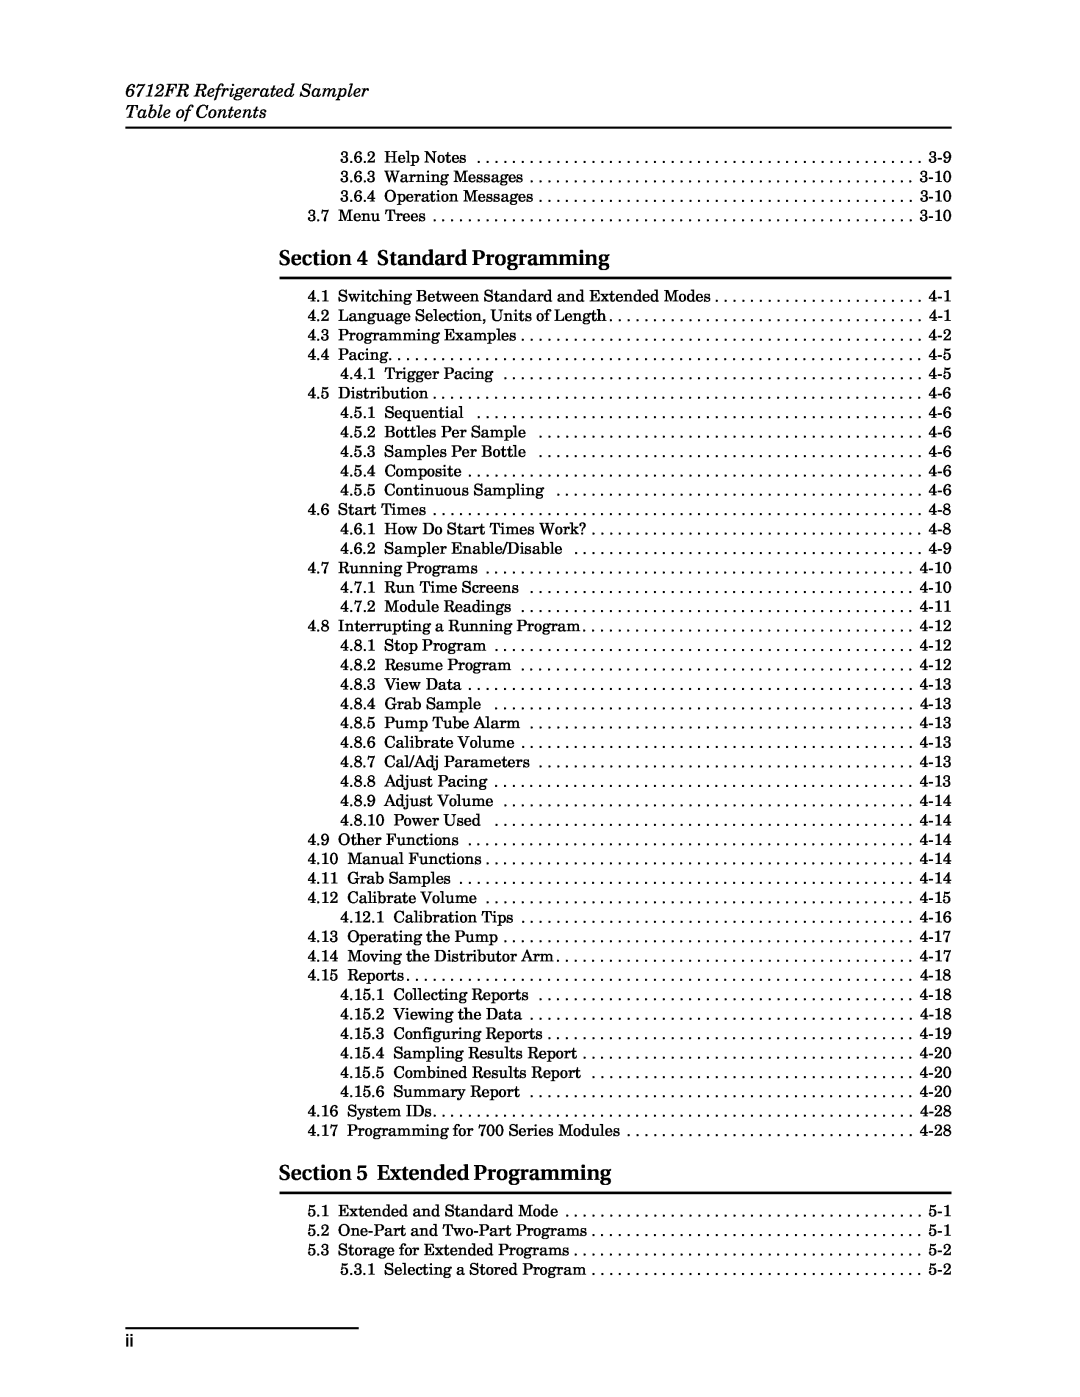 Teledyne manual Standard Programming, Extended Programming, 6712FR Refrigerated Sampler Table of Contents 